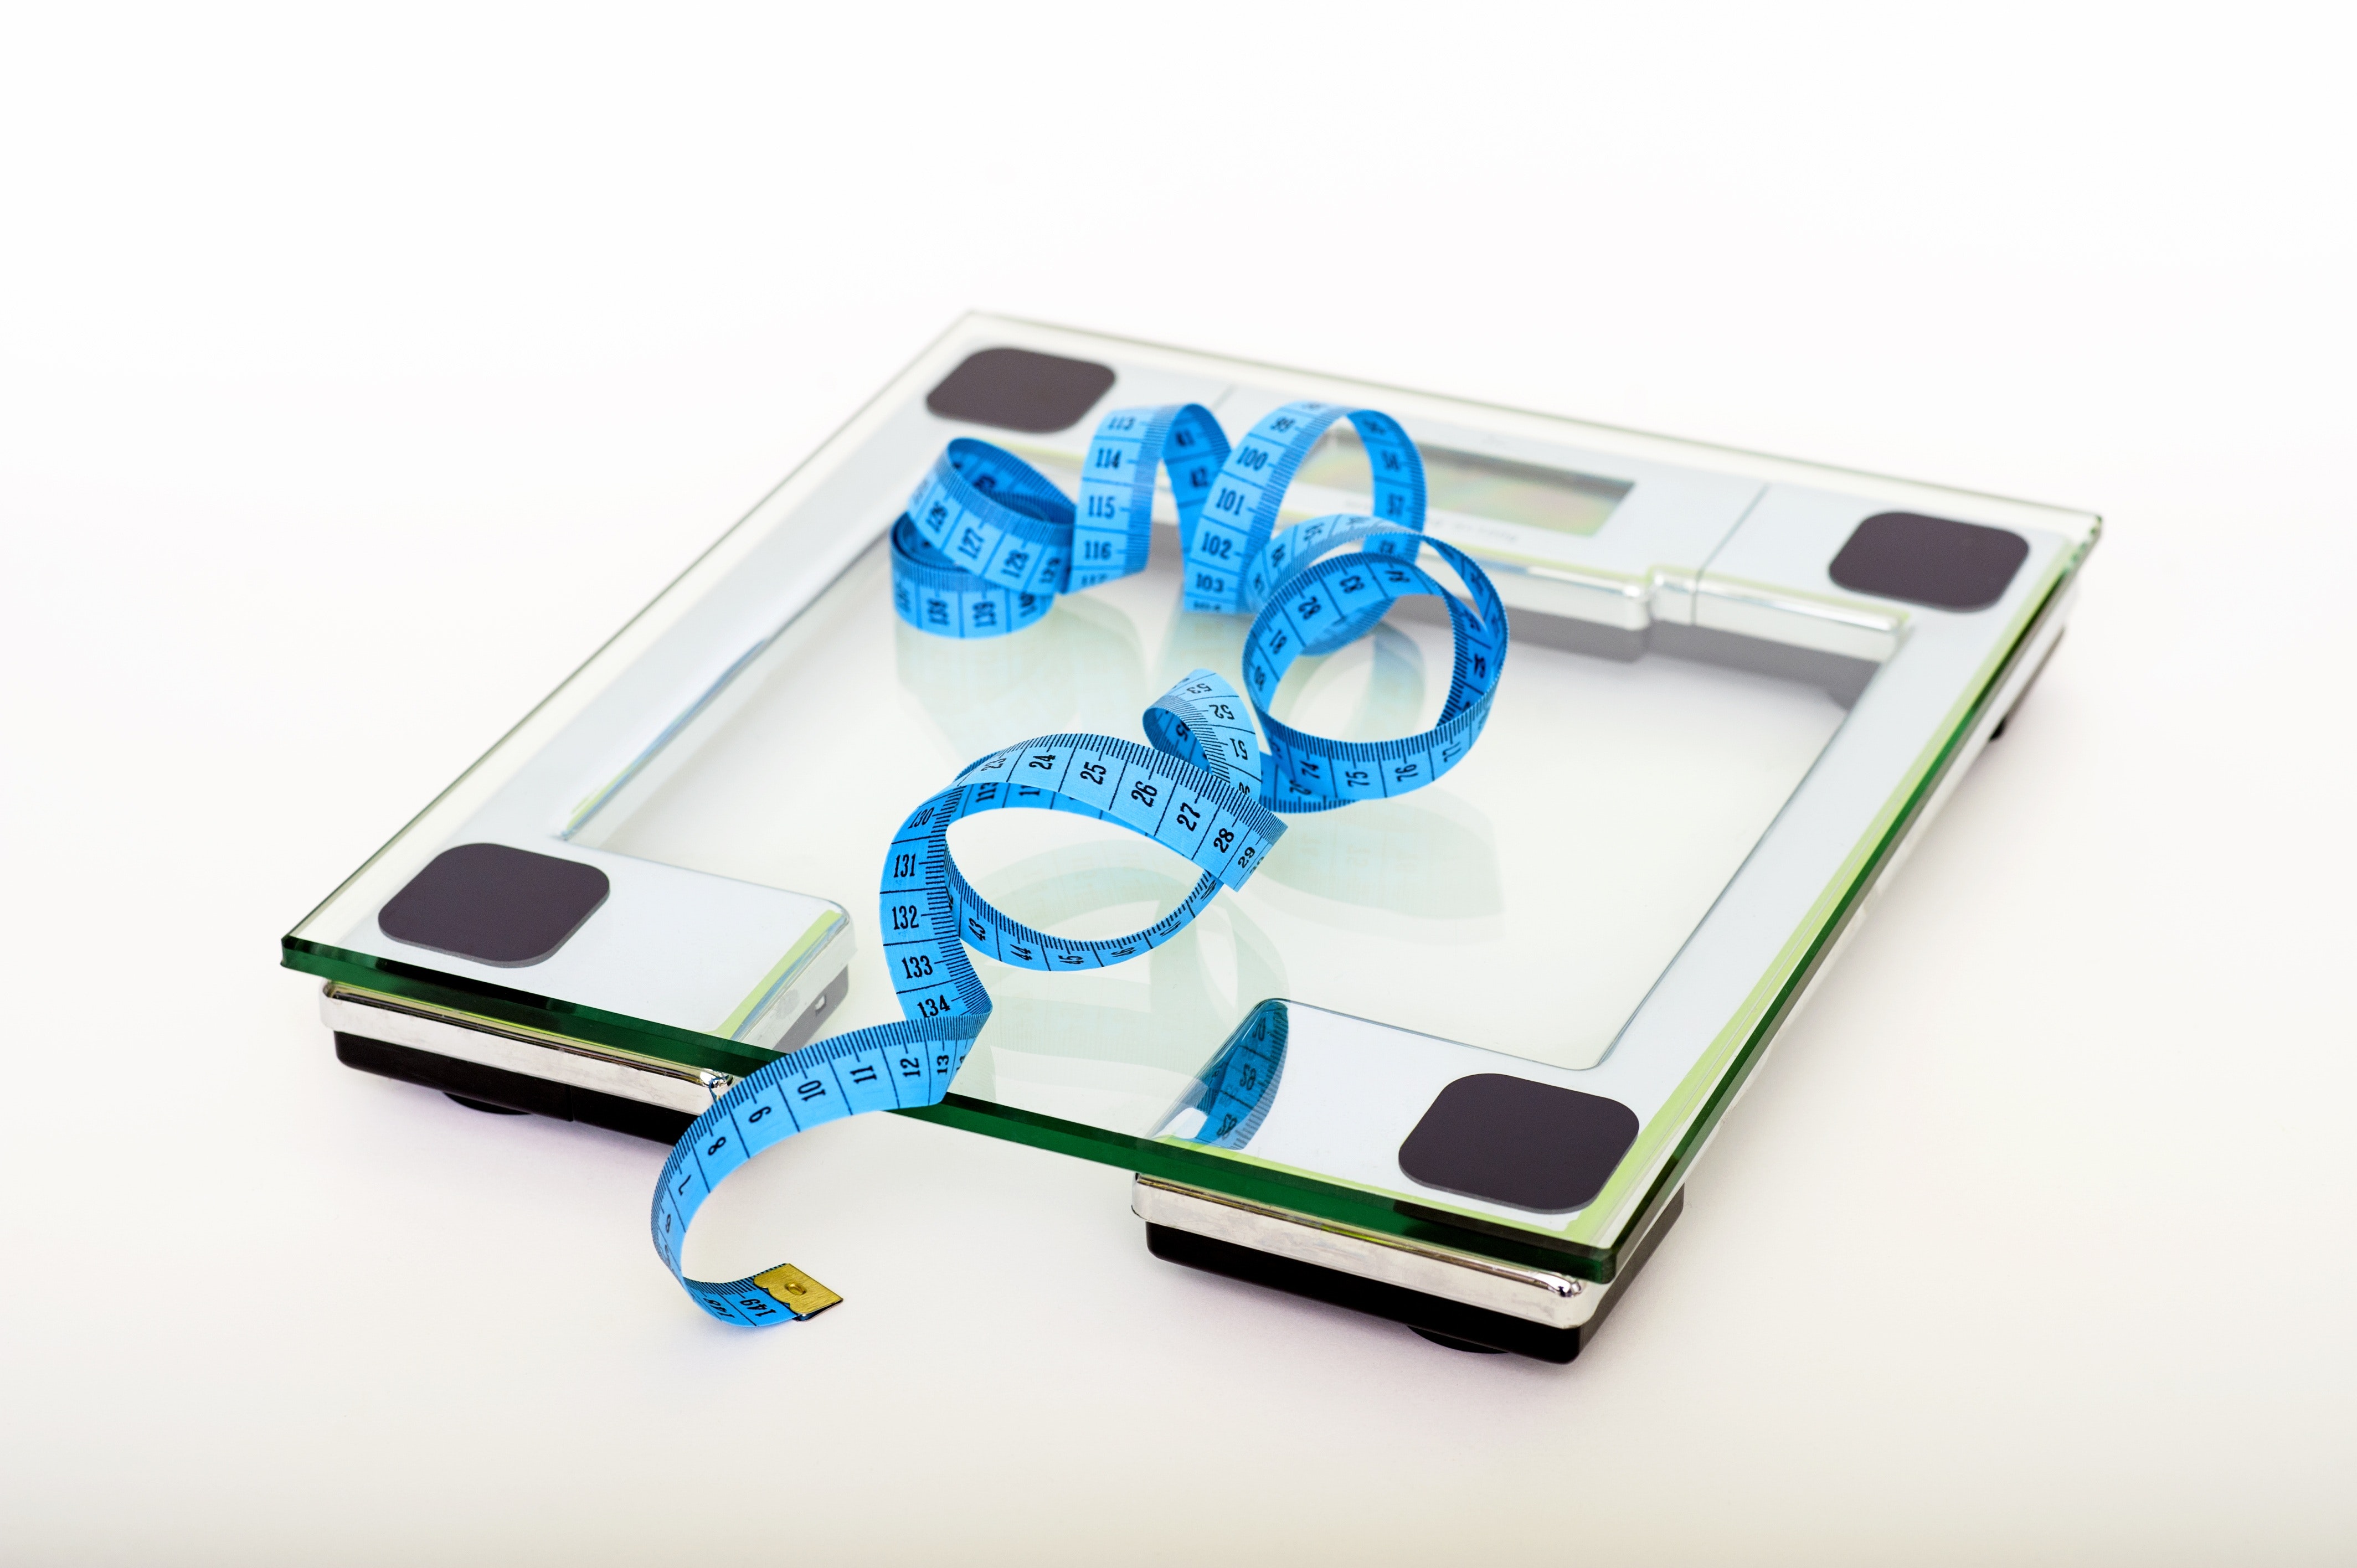 weight loss vs. fat loss measuring tape on top of scale